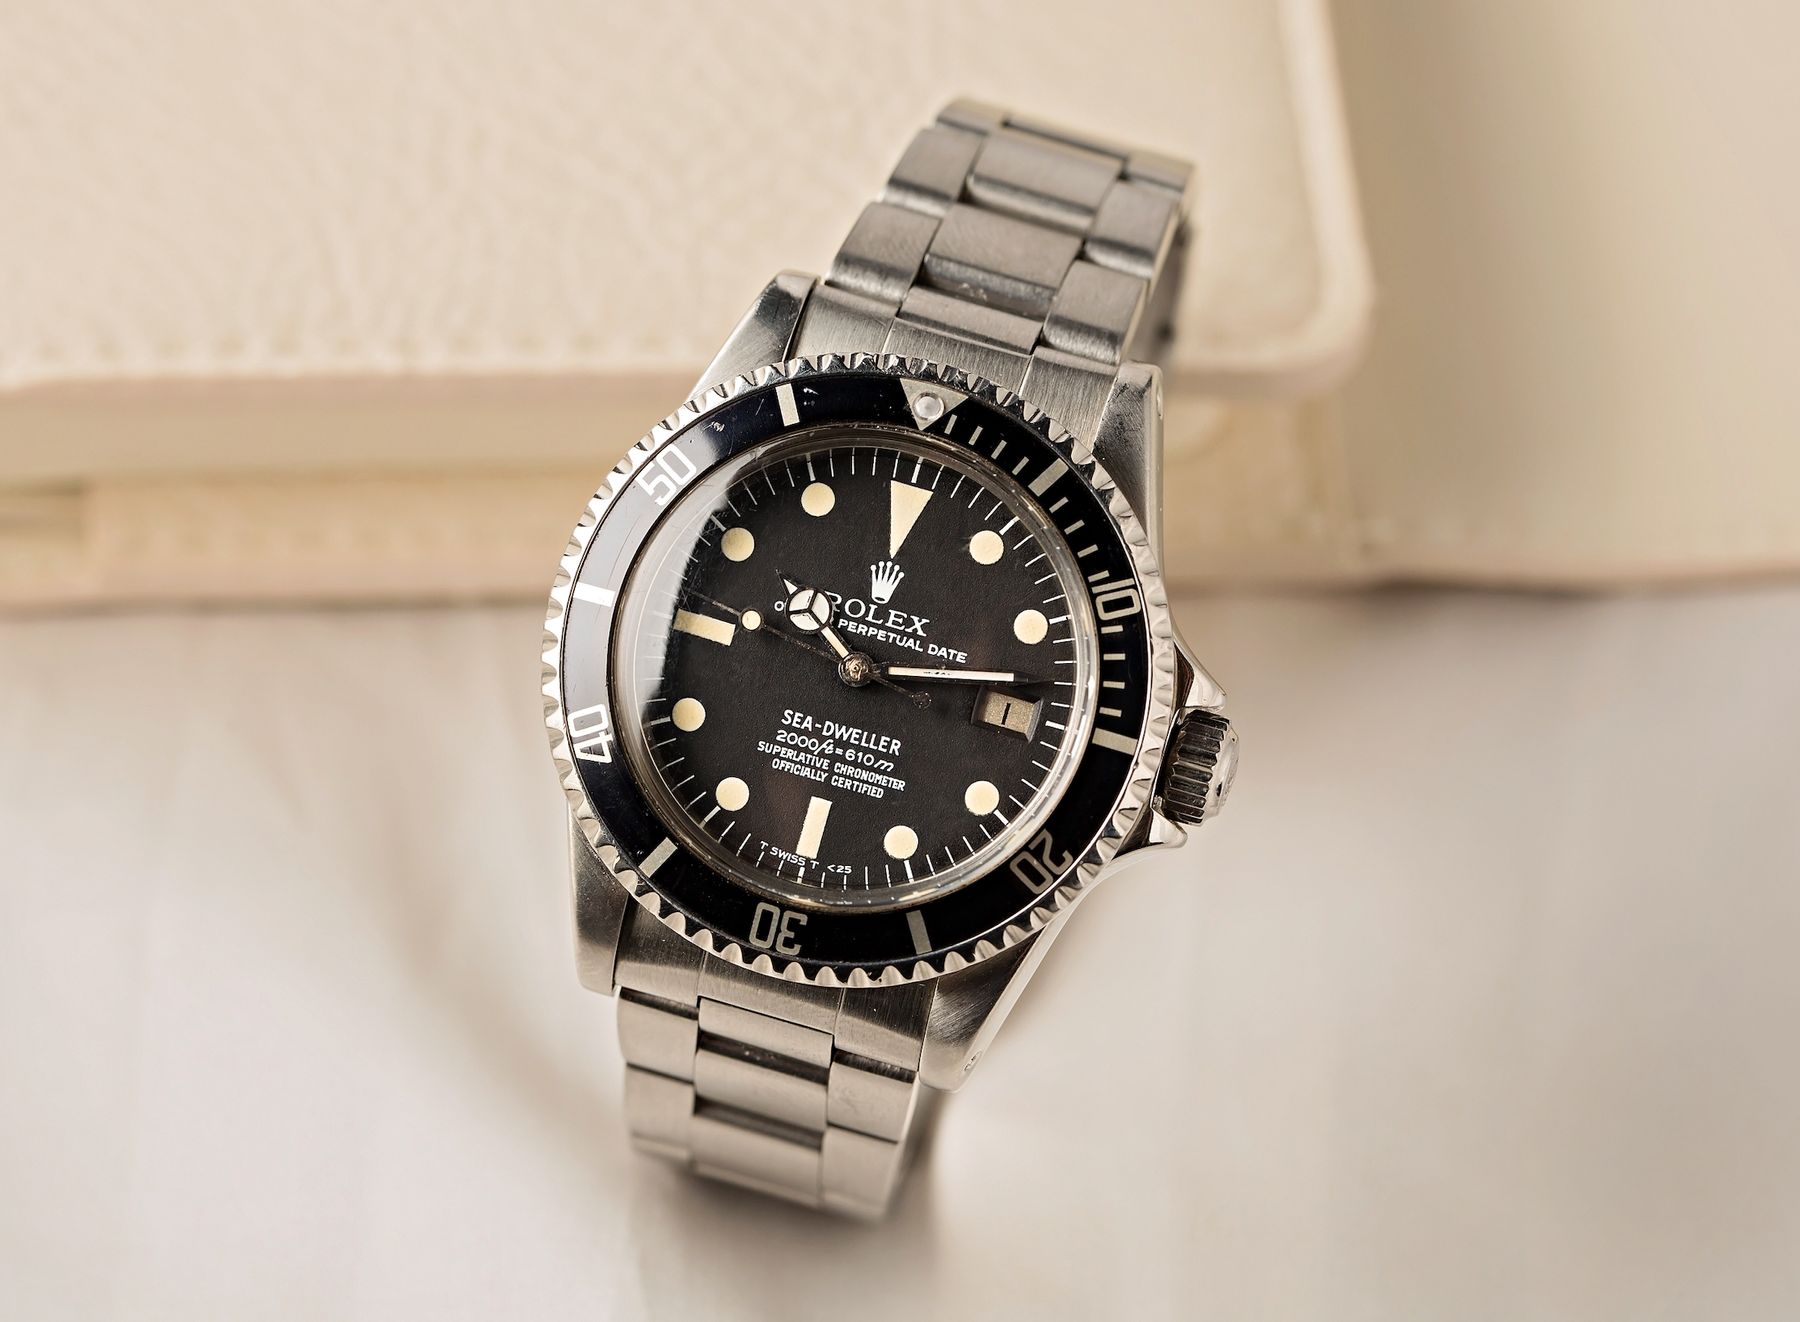 Vintage Rolex Sea-Dweller Great White Reference 1665